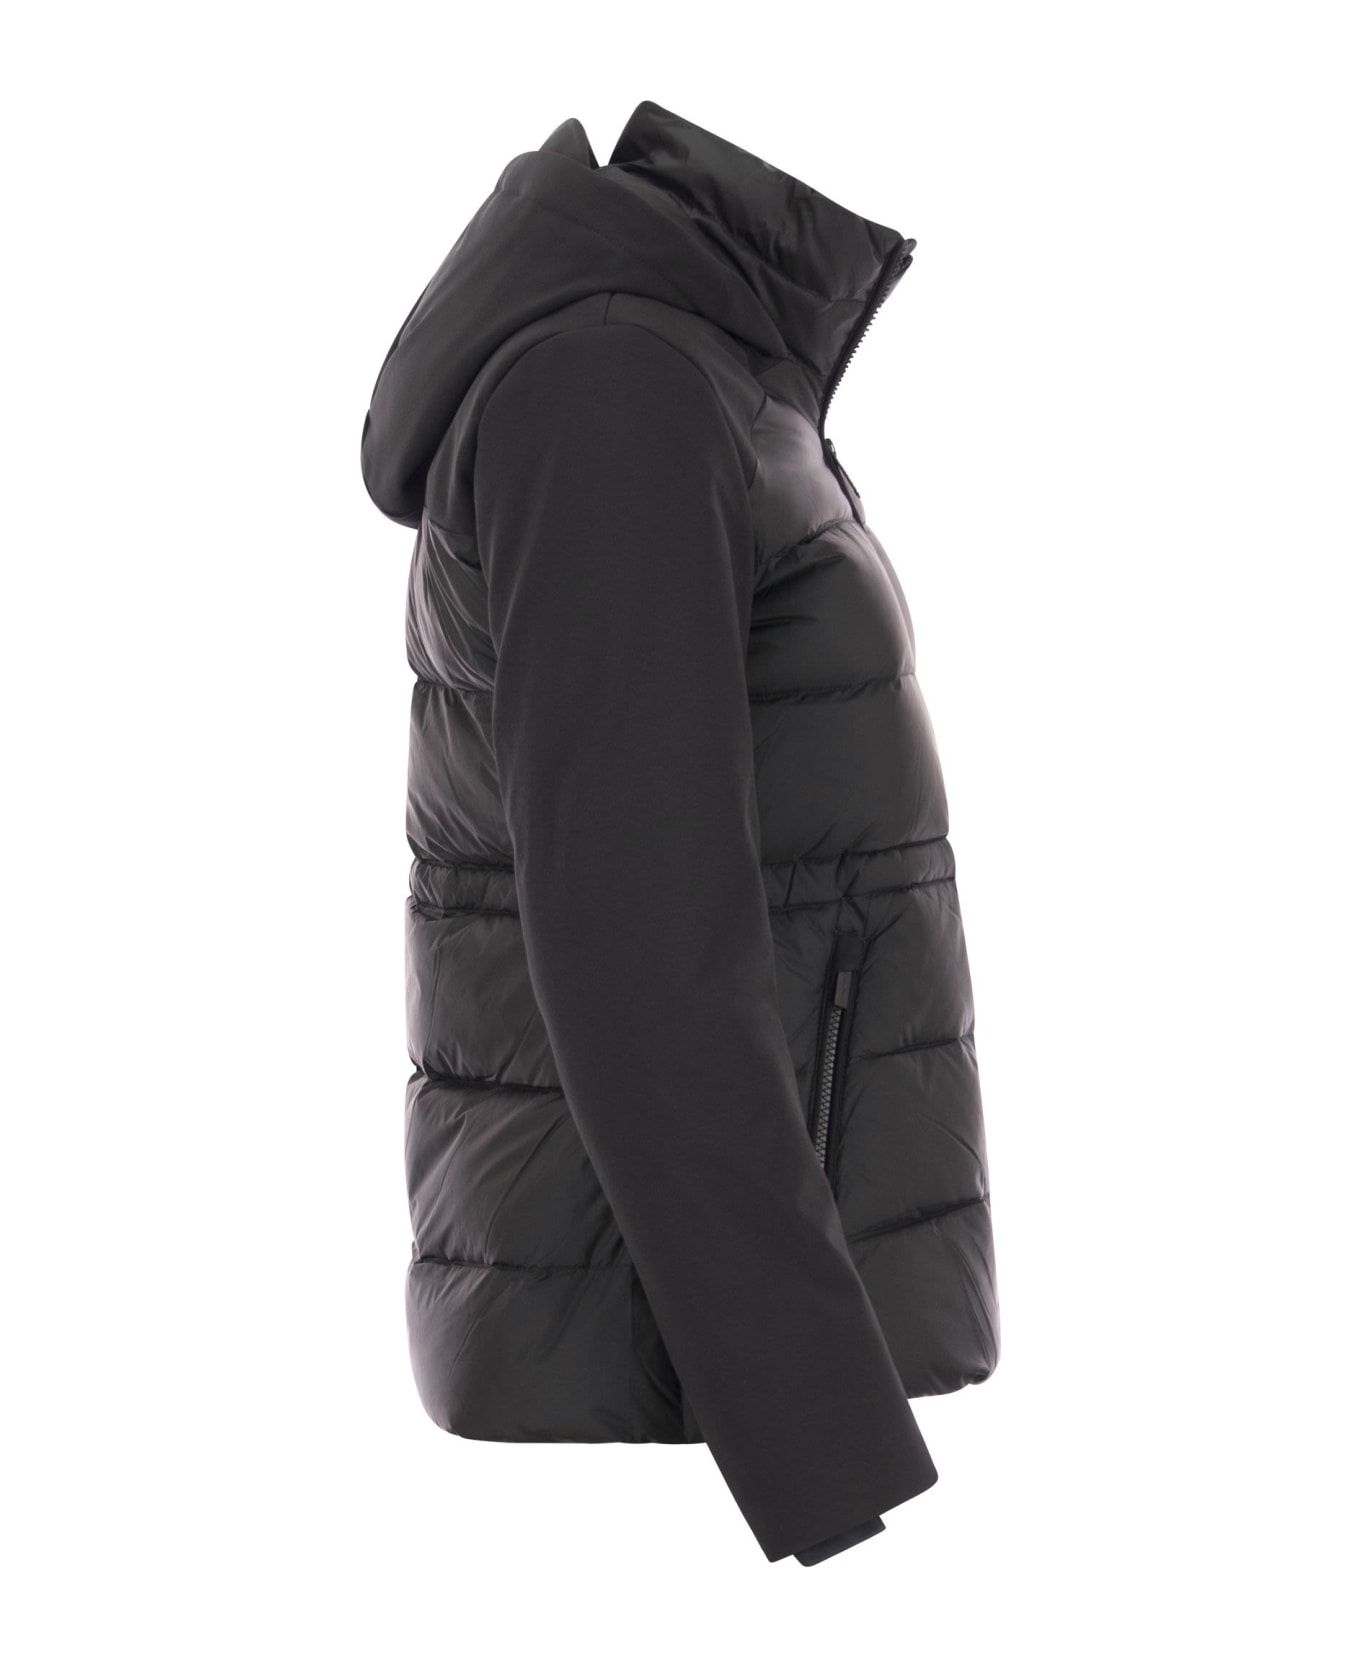 Woolrich Quilted Down Jacket With Hood - Black ダウンジャケット